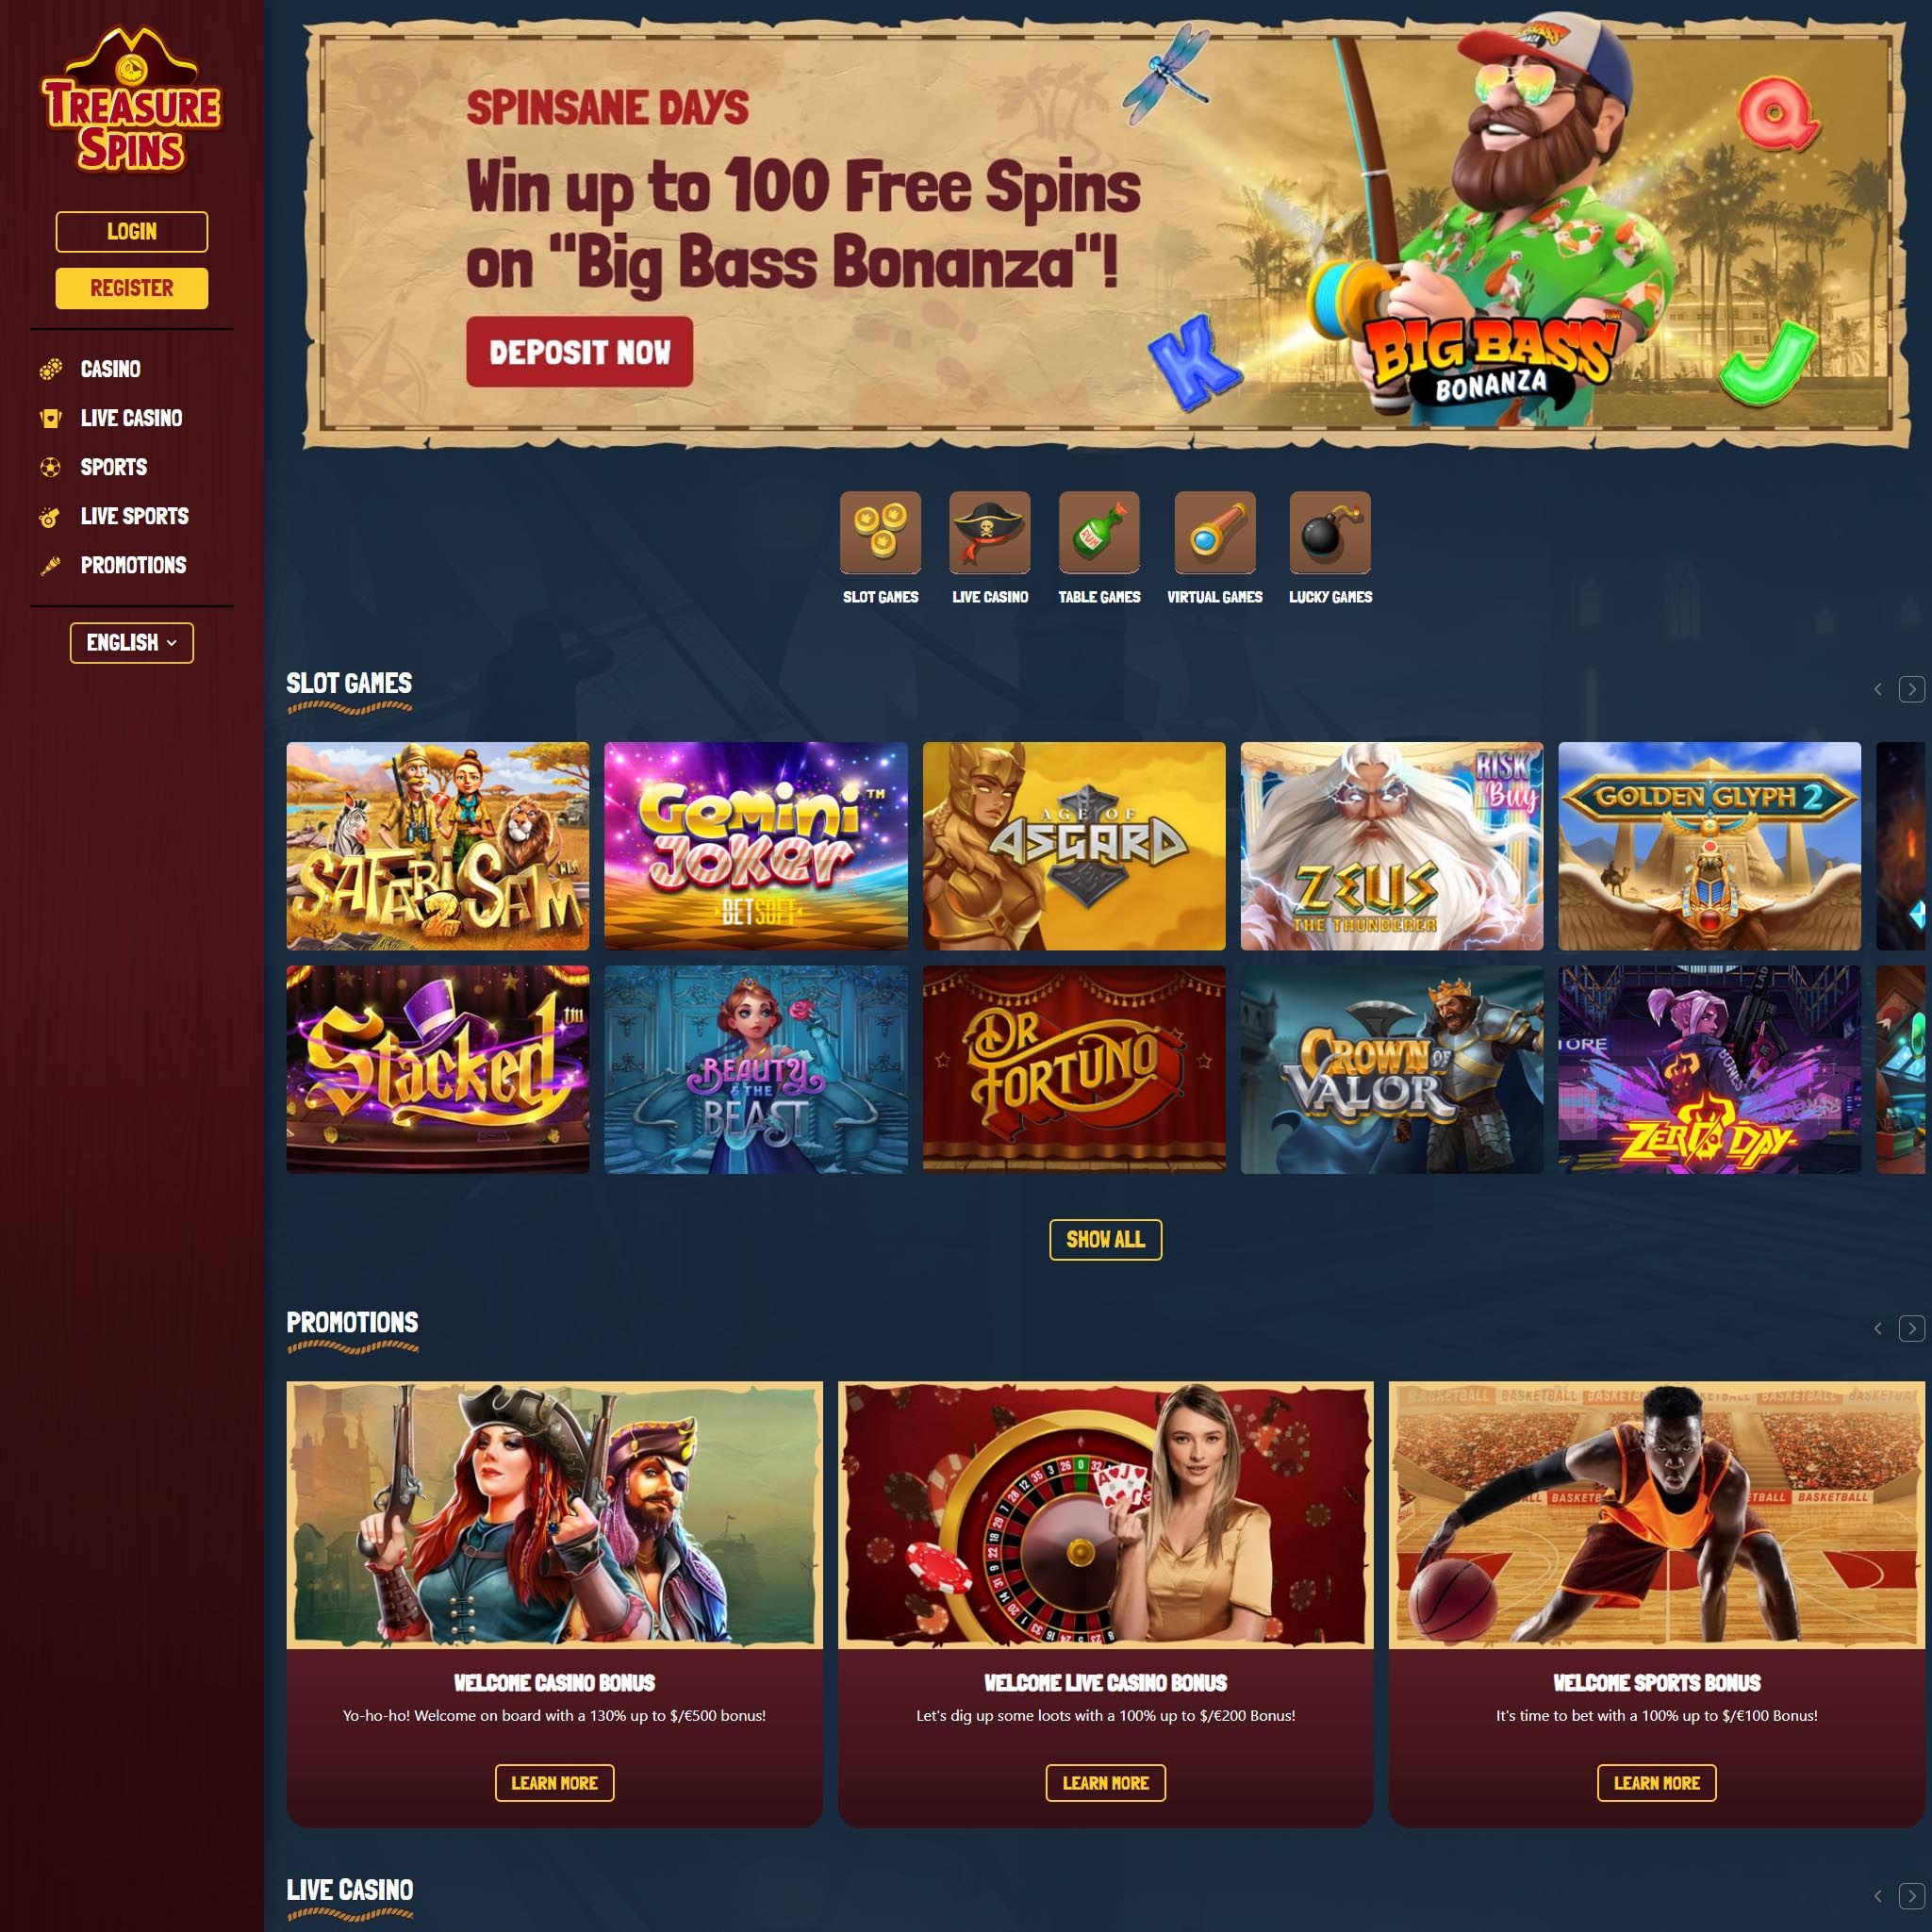 TreasureSpins Casino review by Mr. Gamble